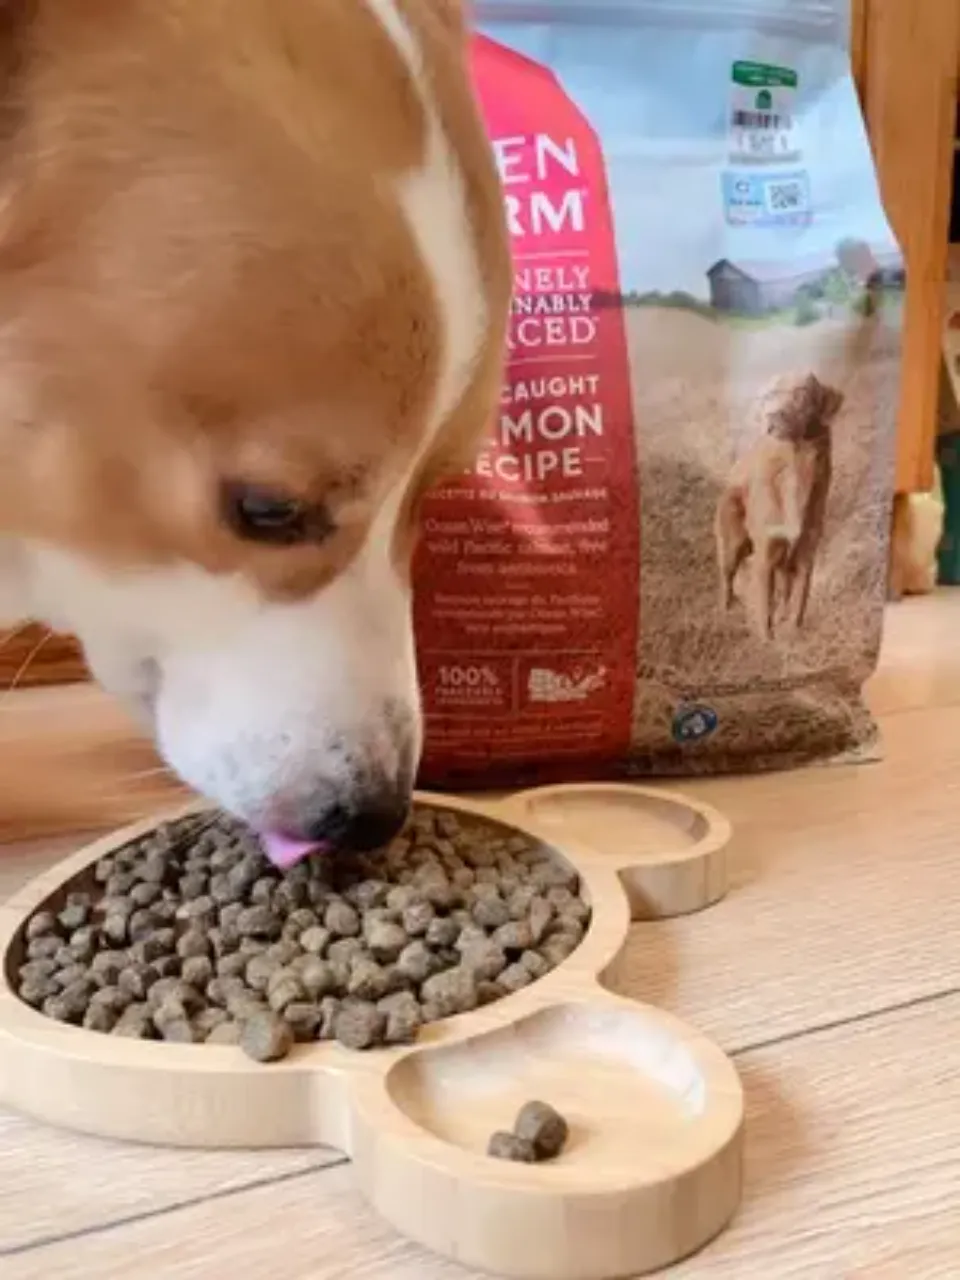 Open Farm Dog Food Review 